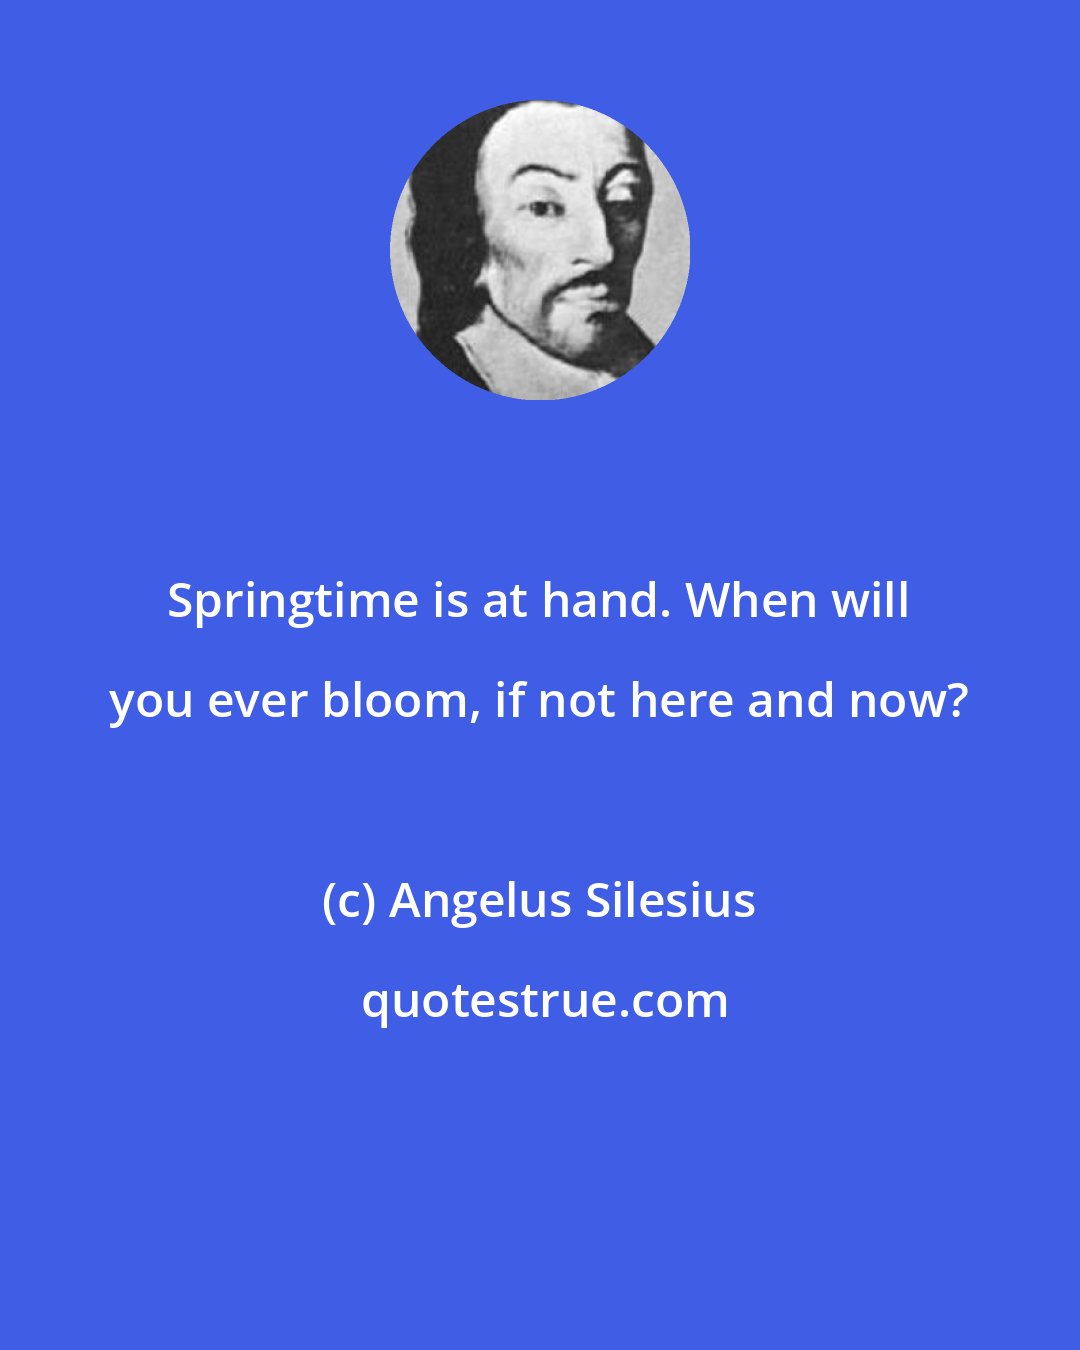 Angelus Silesius: Springtime is at hand. When will you ever bloom, if not here and now?